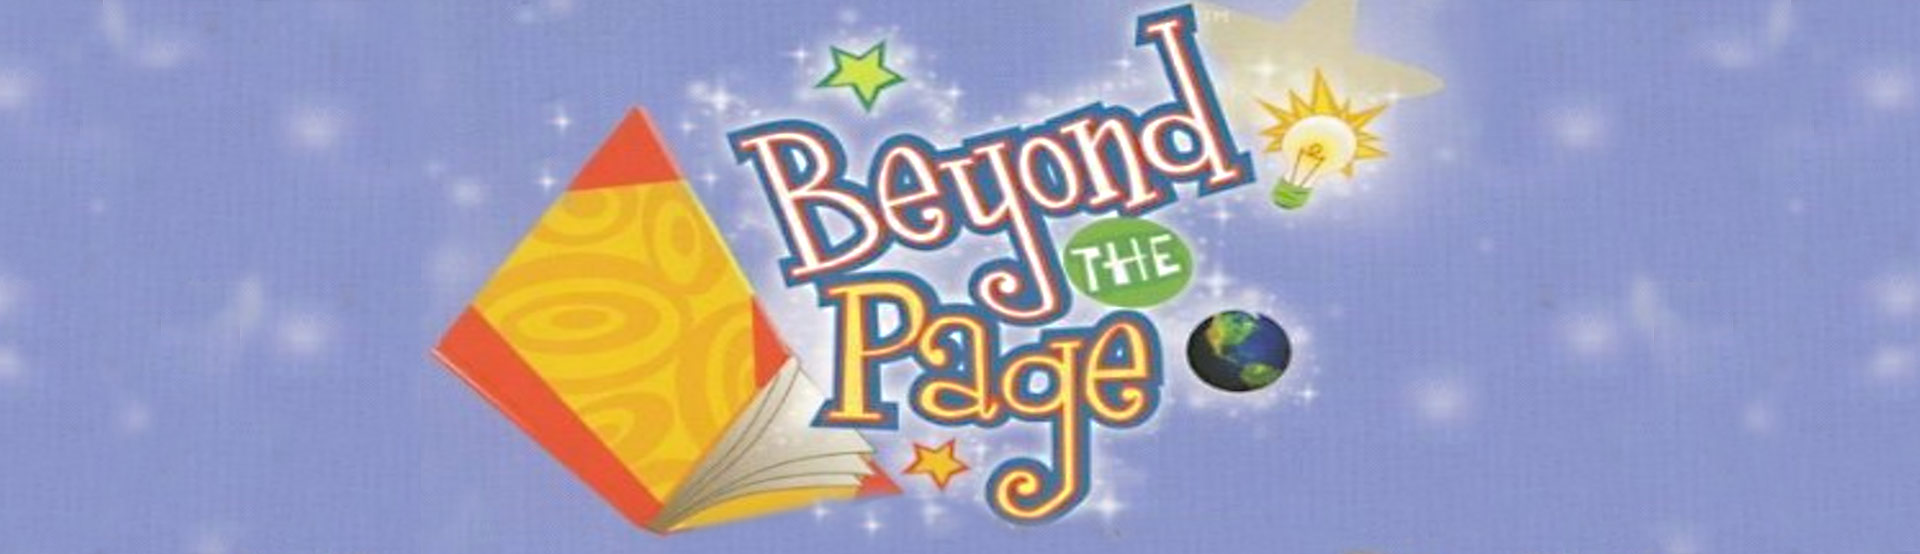 Beyond The Page